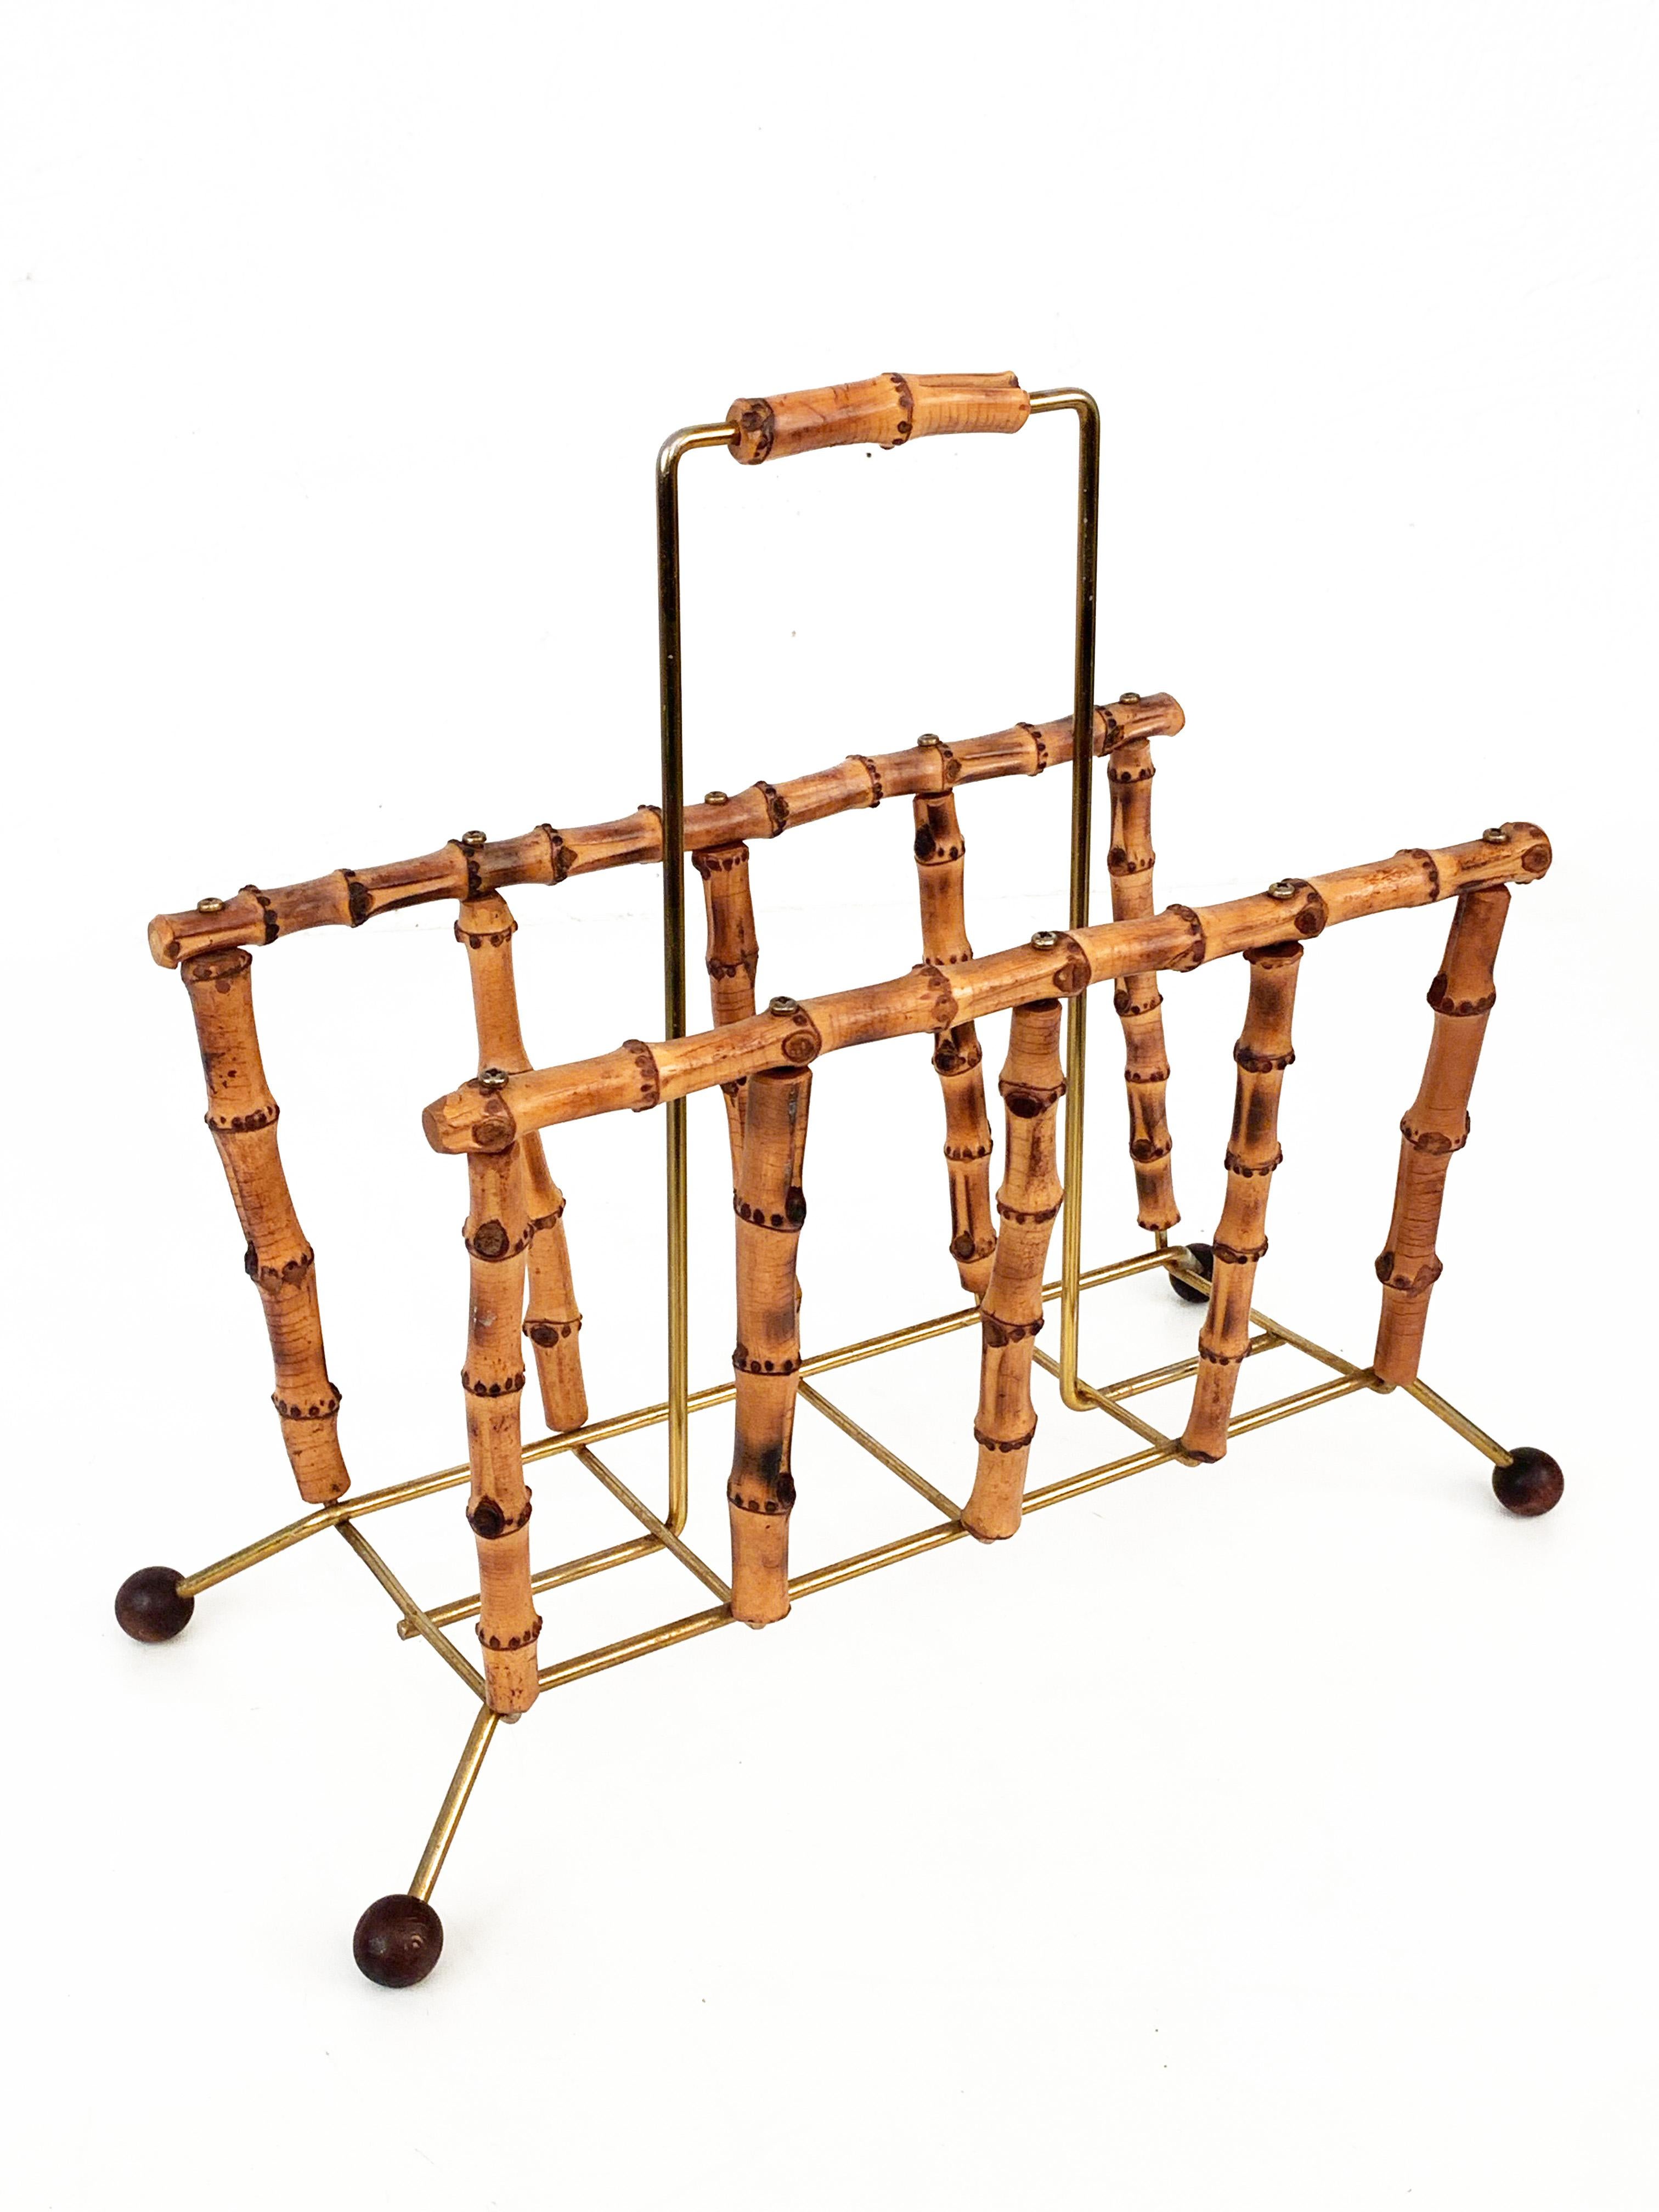 Amazing Mid-Century Modern bamboo and brass magazine rack. This wonderful item was made in France during the 1960s.

A fantastic umbrella stand made of bamboo with a gilded brass structure. The feet are made of bamboo balls.

This marvellous